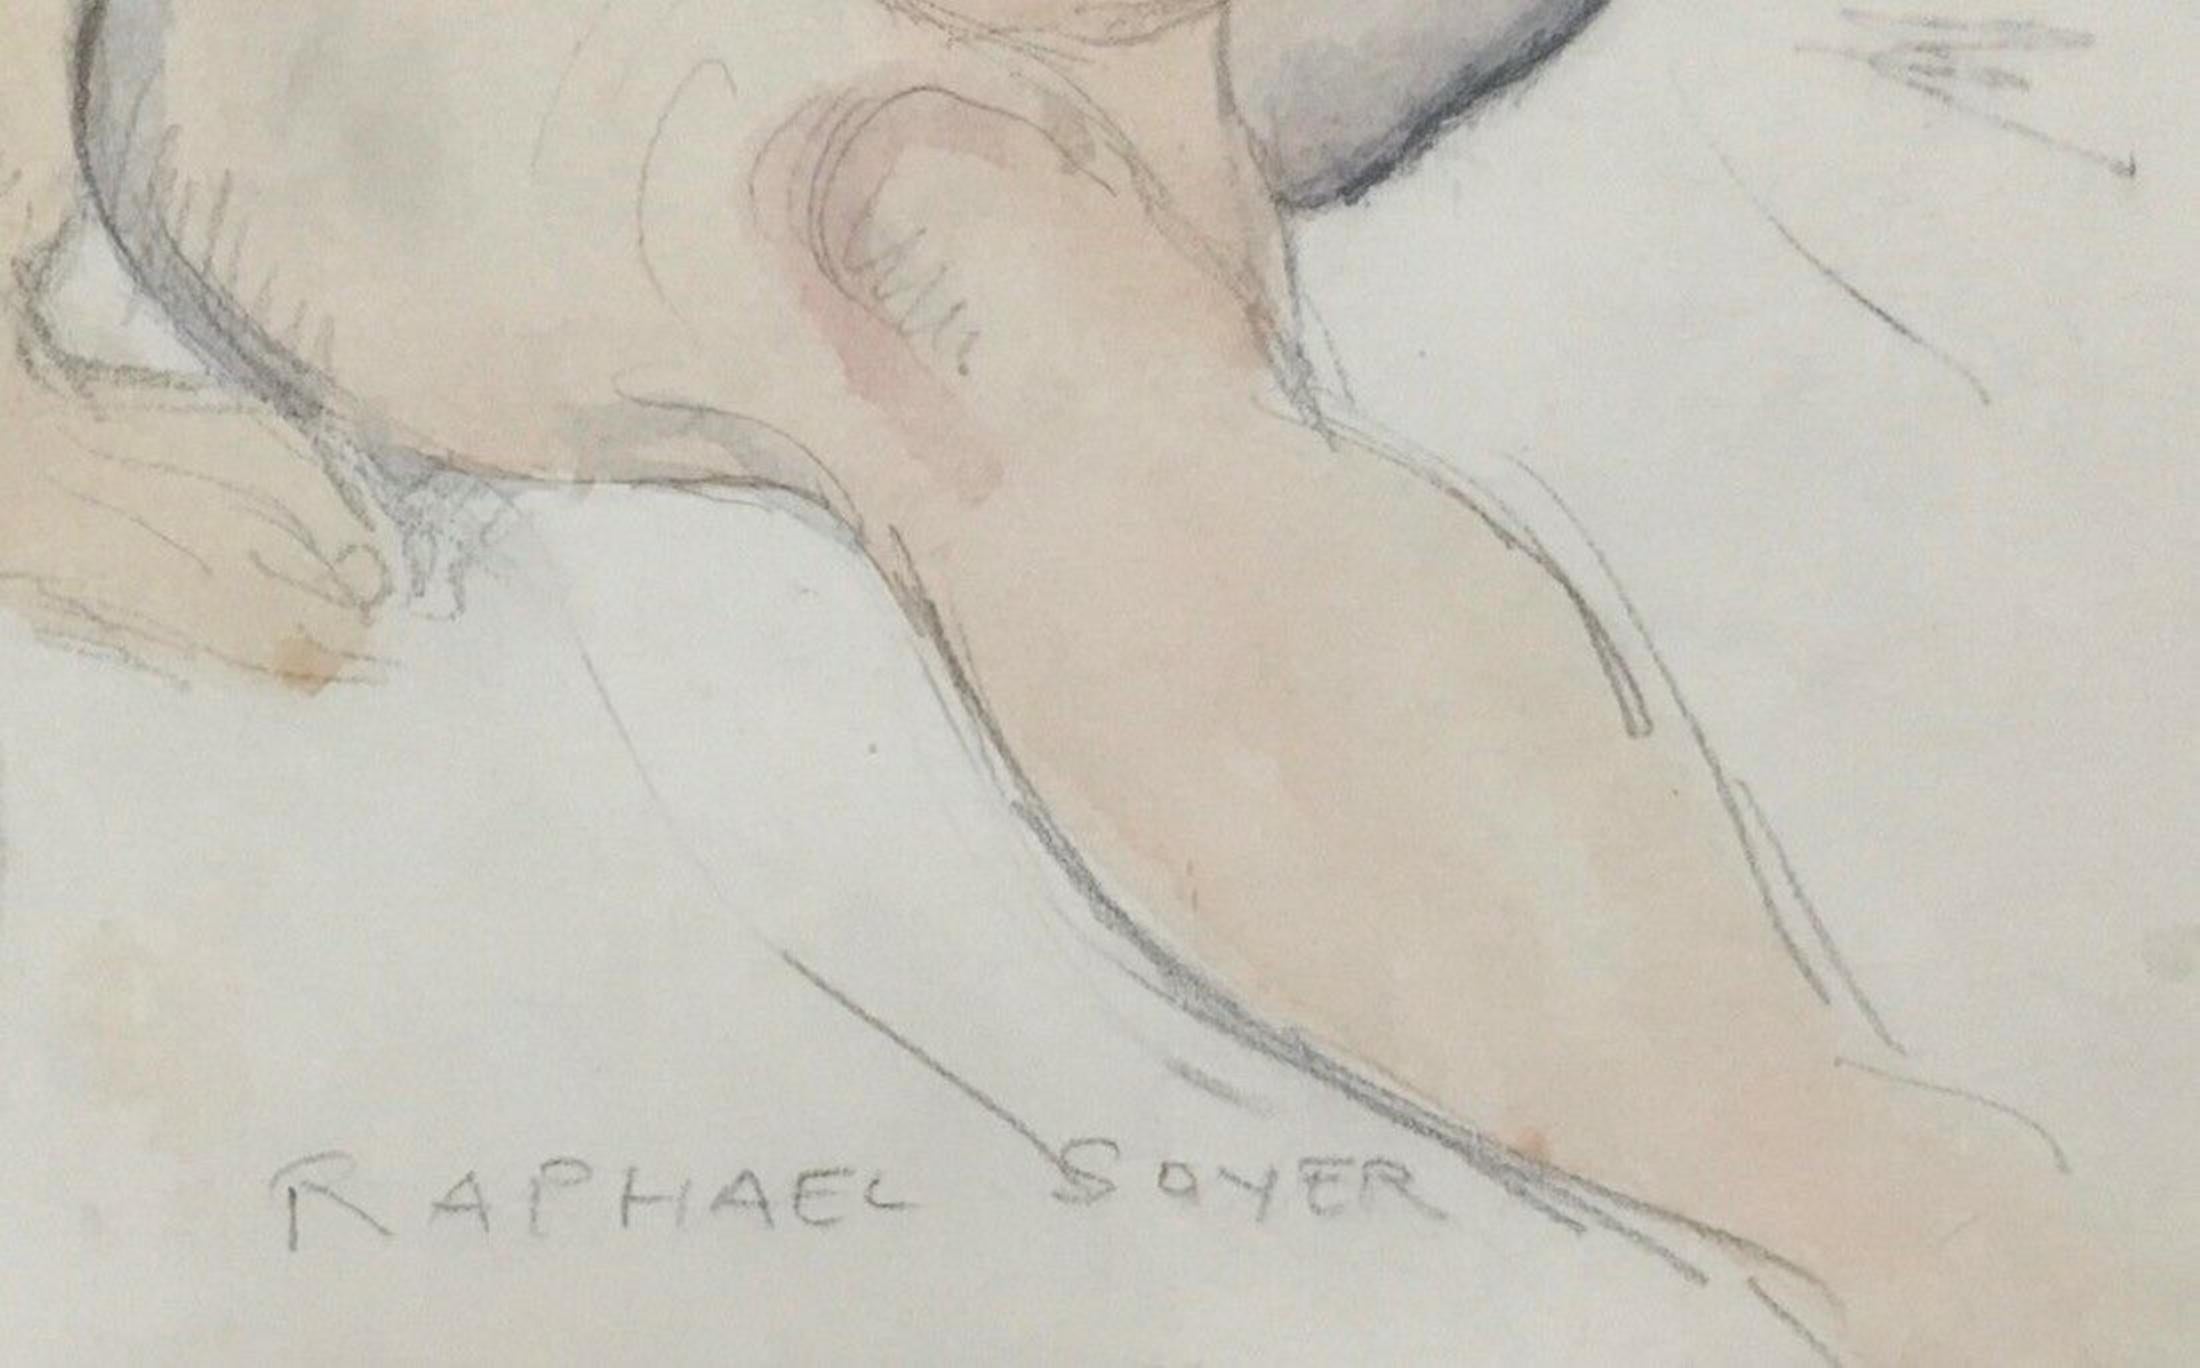 Artist: Raphael Soyer (1899-1987)
Title: Two Nudes
Year: Circa 1987
Medium: Watercolor & Pencil Drawing on Archival paper
Size: 13.75 x 17 inches
Condition: Excellent
Inscription: Signed in pencil by the artist

RAPHAEL SOYER (1899-1987)